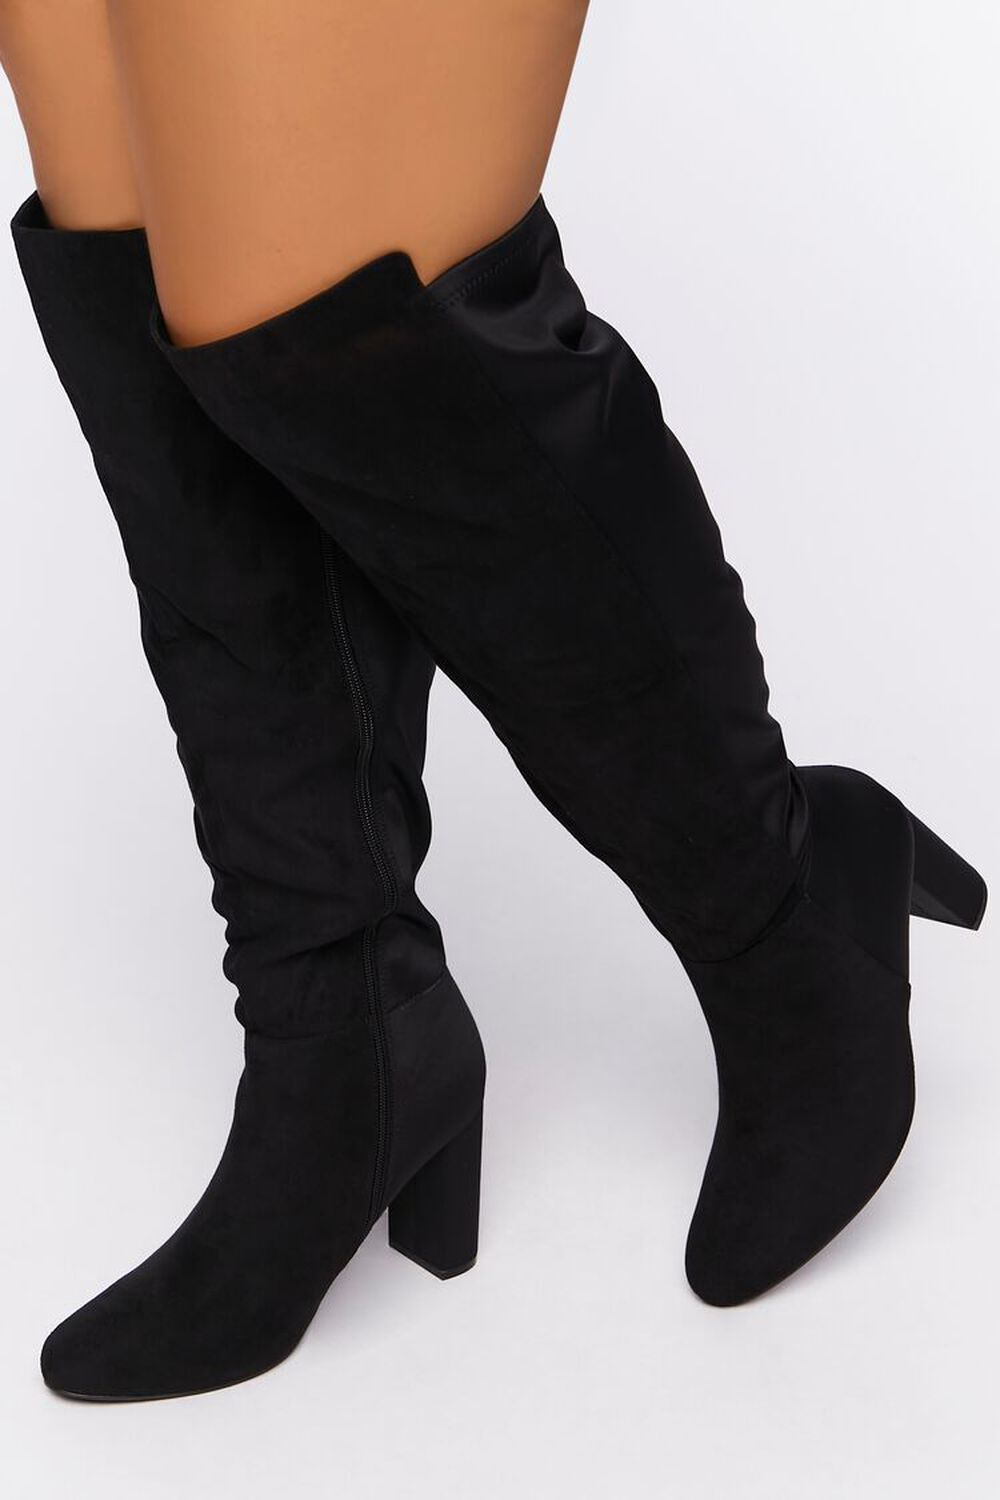 BLACK Faux Suede Over-the-Knee Boots (Wide), image 1